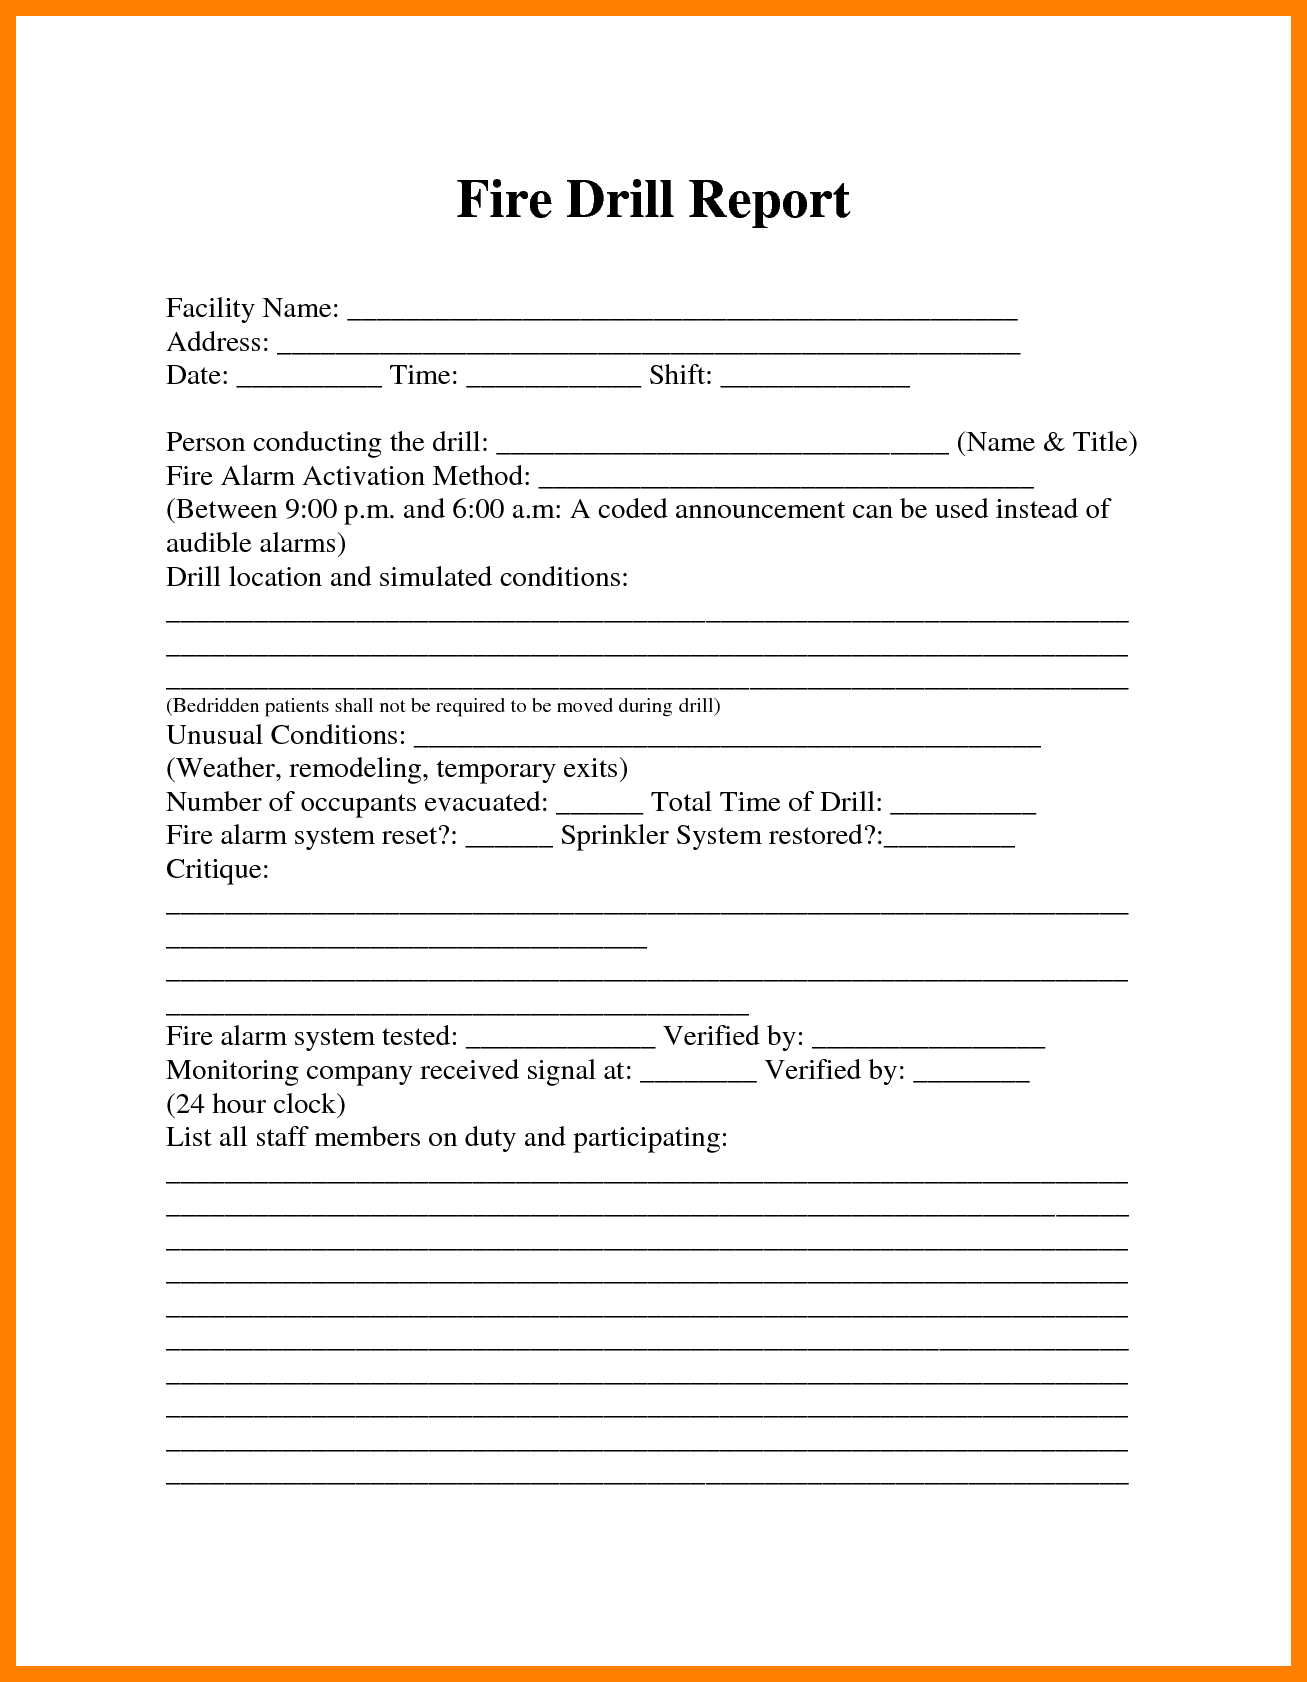 basic-fire-incident-report-form